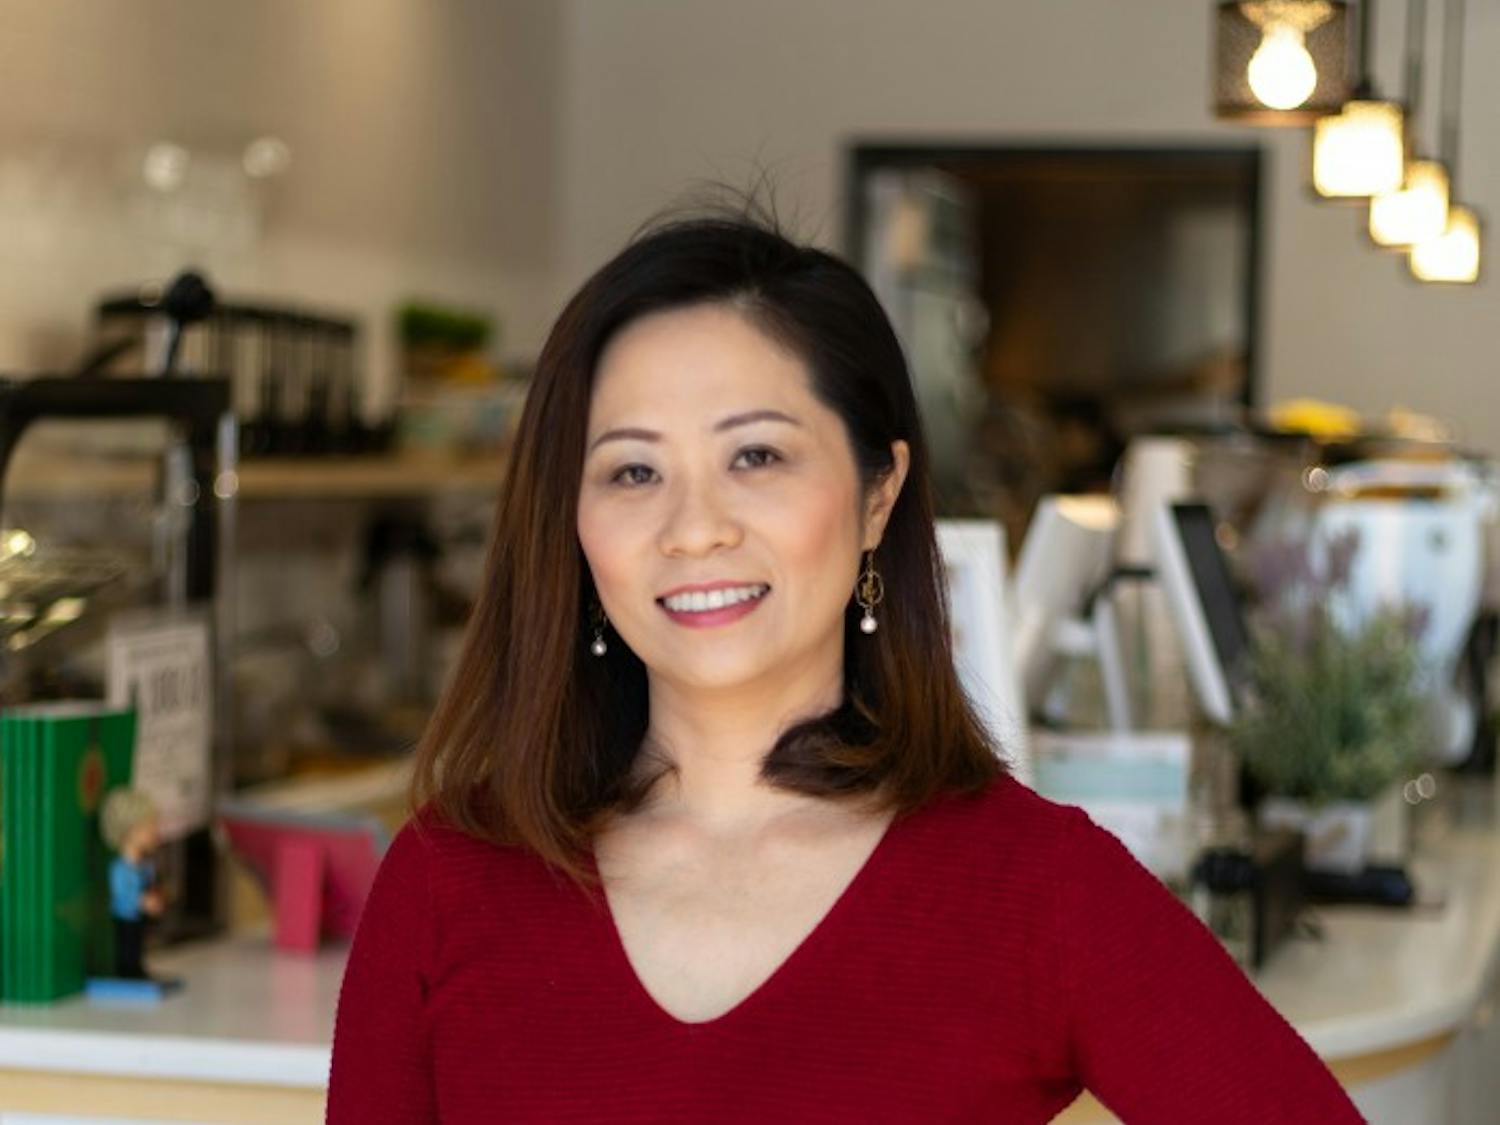 Julia Chiu (Ya Huei) is co-owner of Cha House, a tea house on Franklin Street that she opened with her sister in April of 2018.